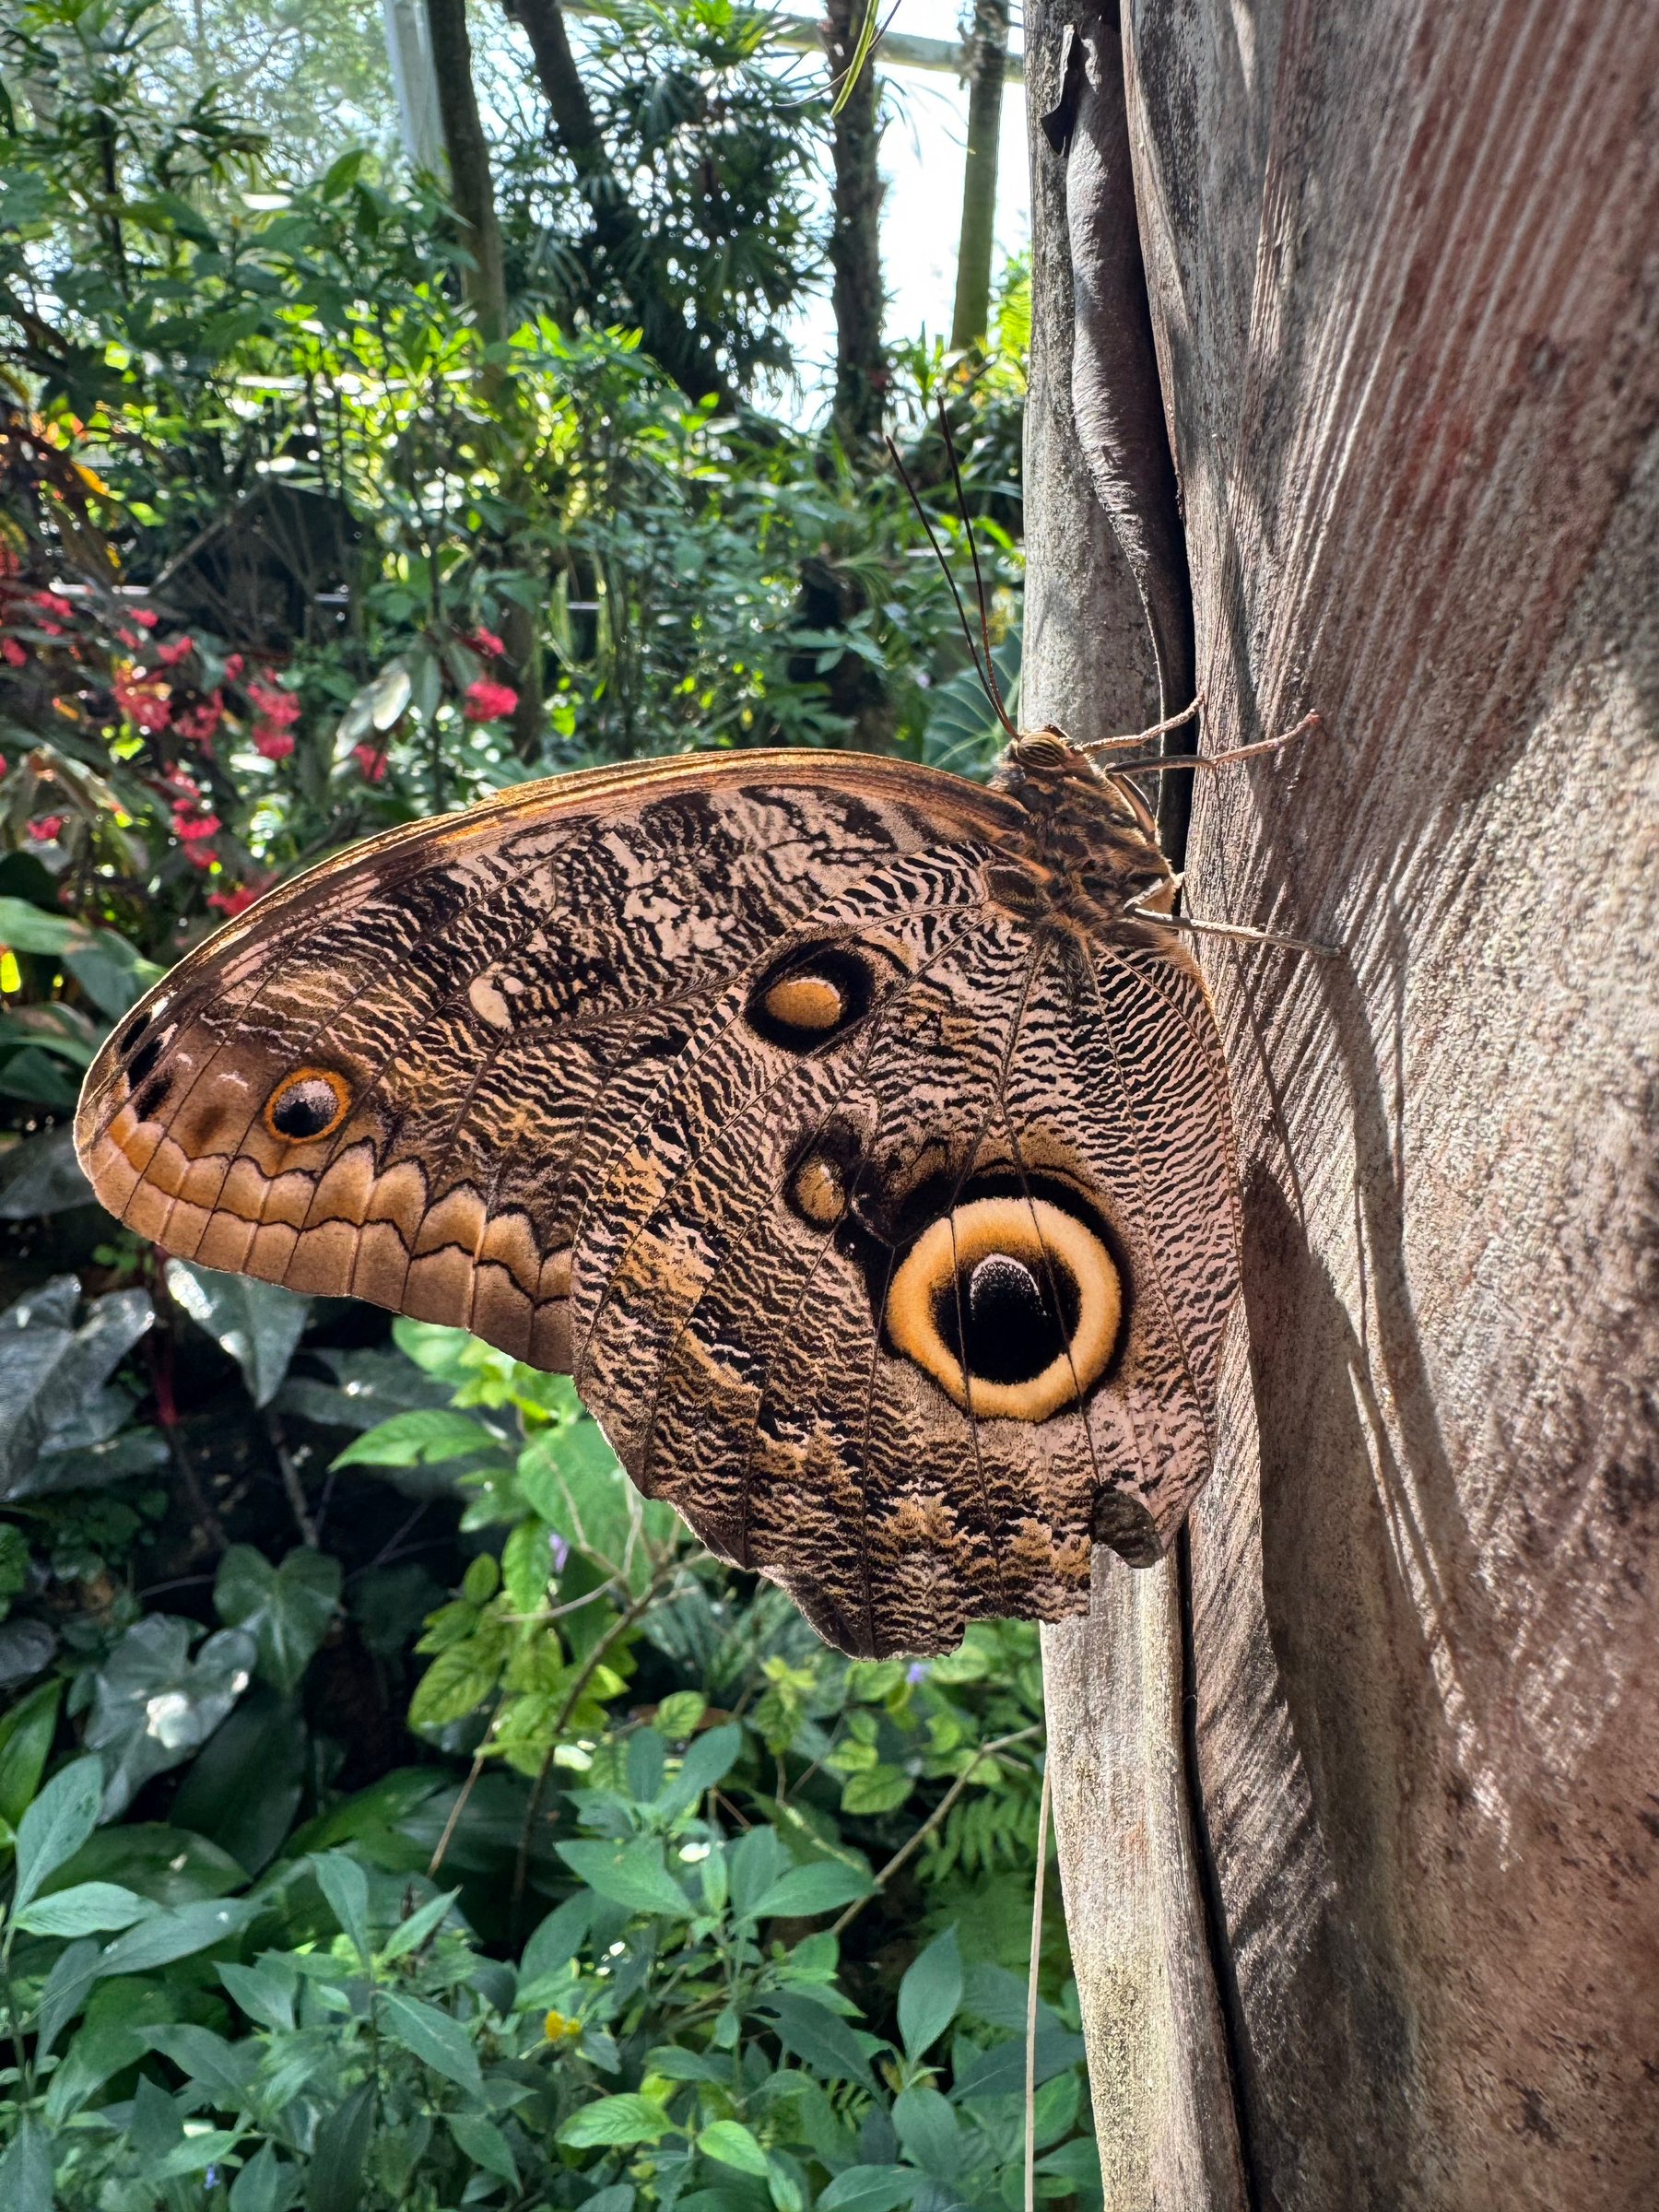 A large brown butterfly with eye-like patterns on its wings resting on a wooden surface, with a lush green background.